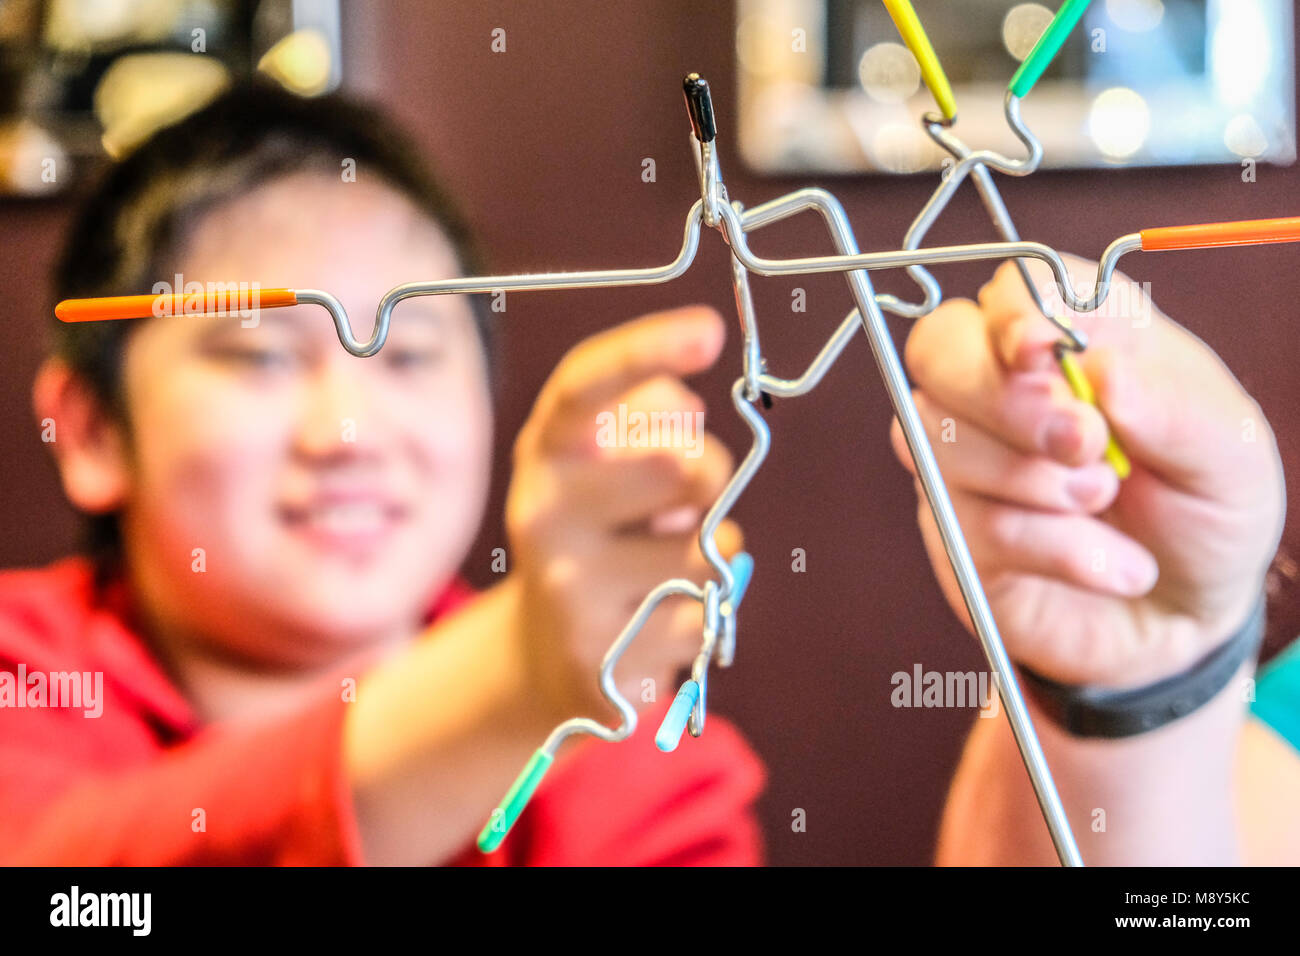 An autistic boy plays magnetic balancing sticks with a counselor at a game room Stock Photo